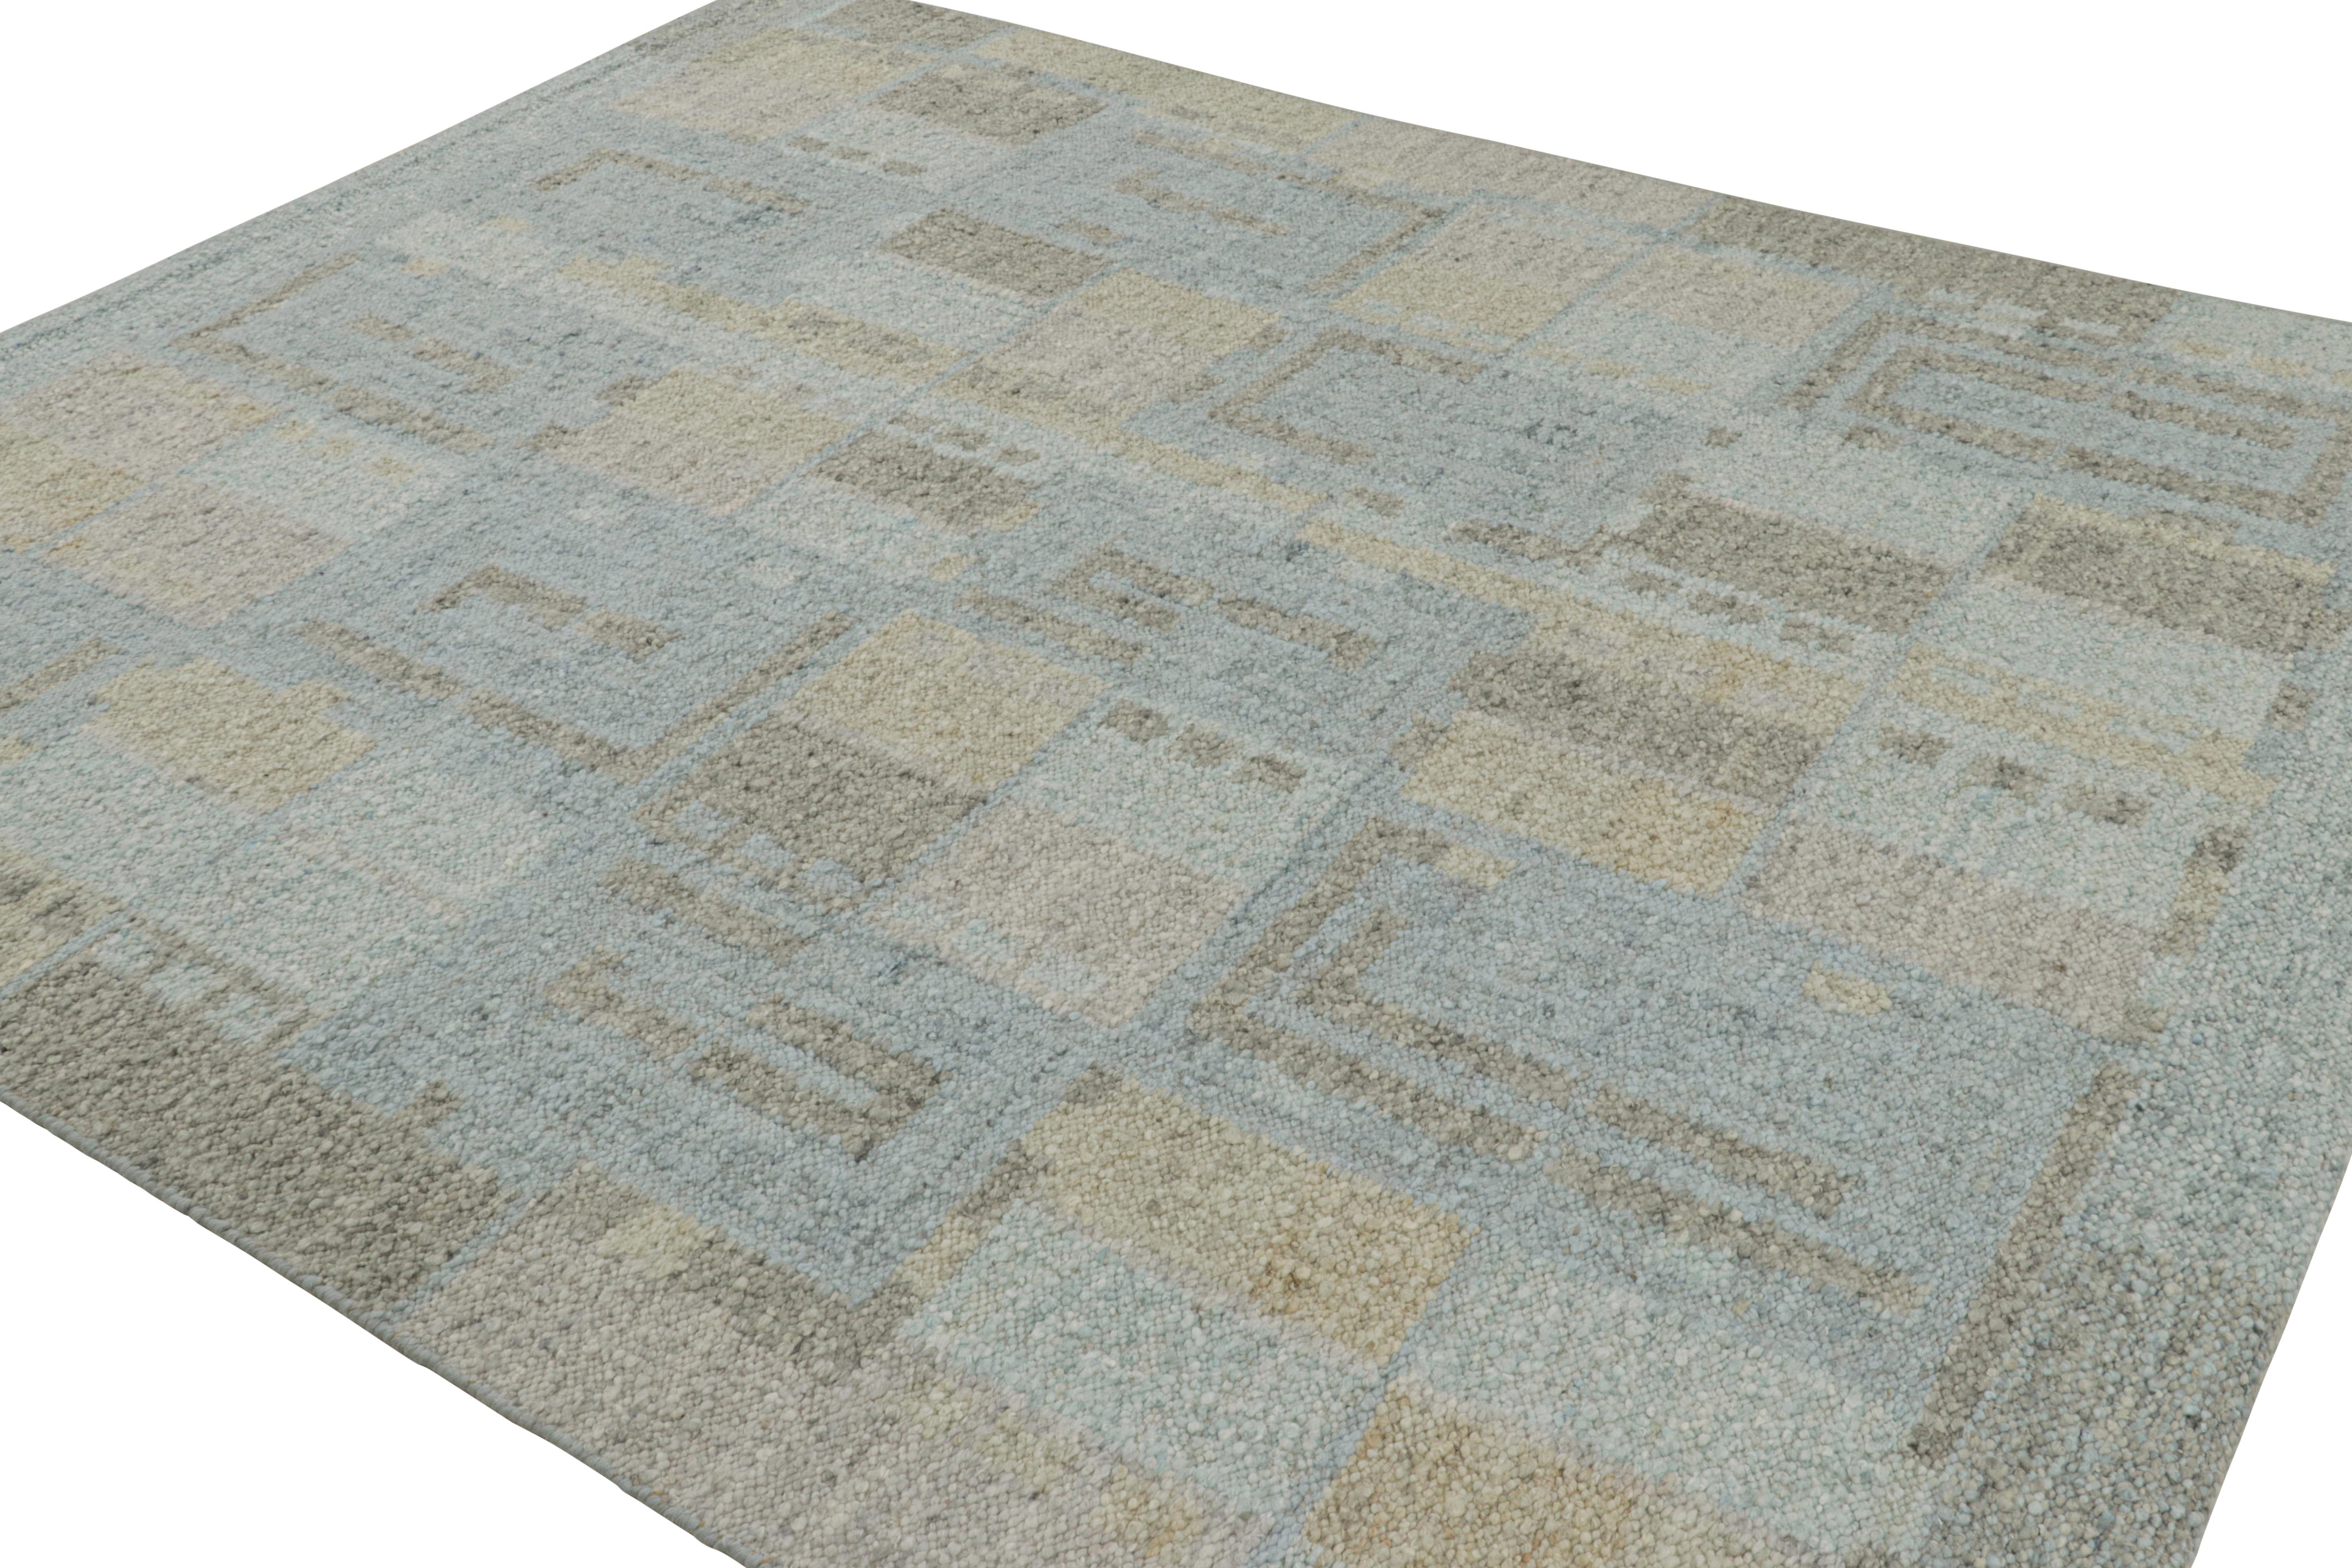 Indian Rug & Kilim’s Scandinavian Style Rug in Blue, Beige and Gray Geometric Patterns For Sale